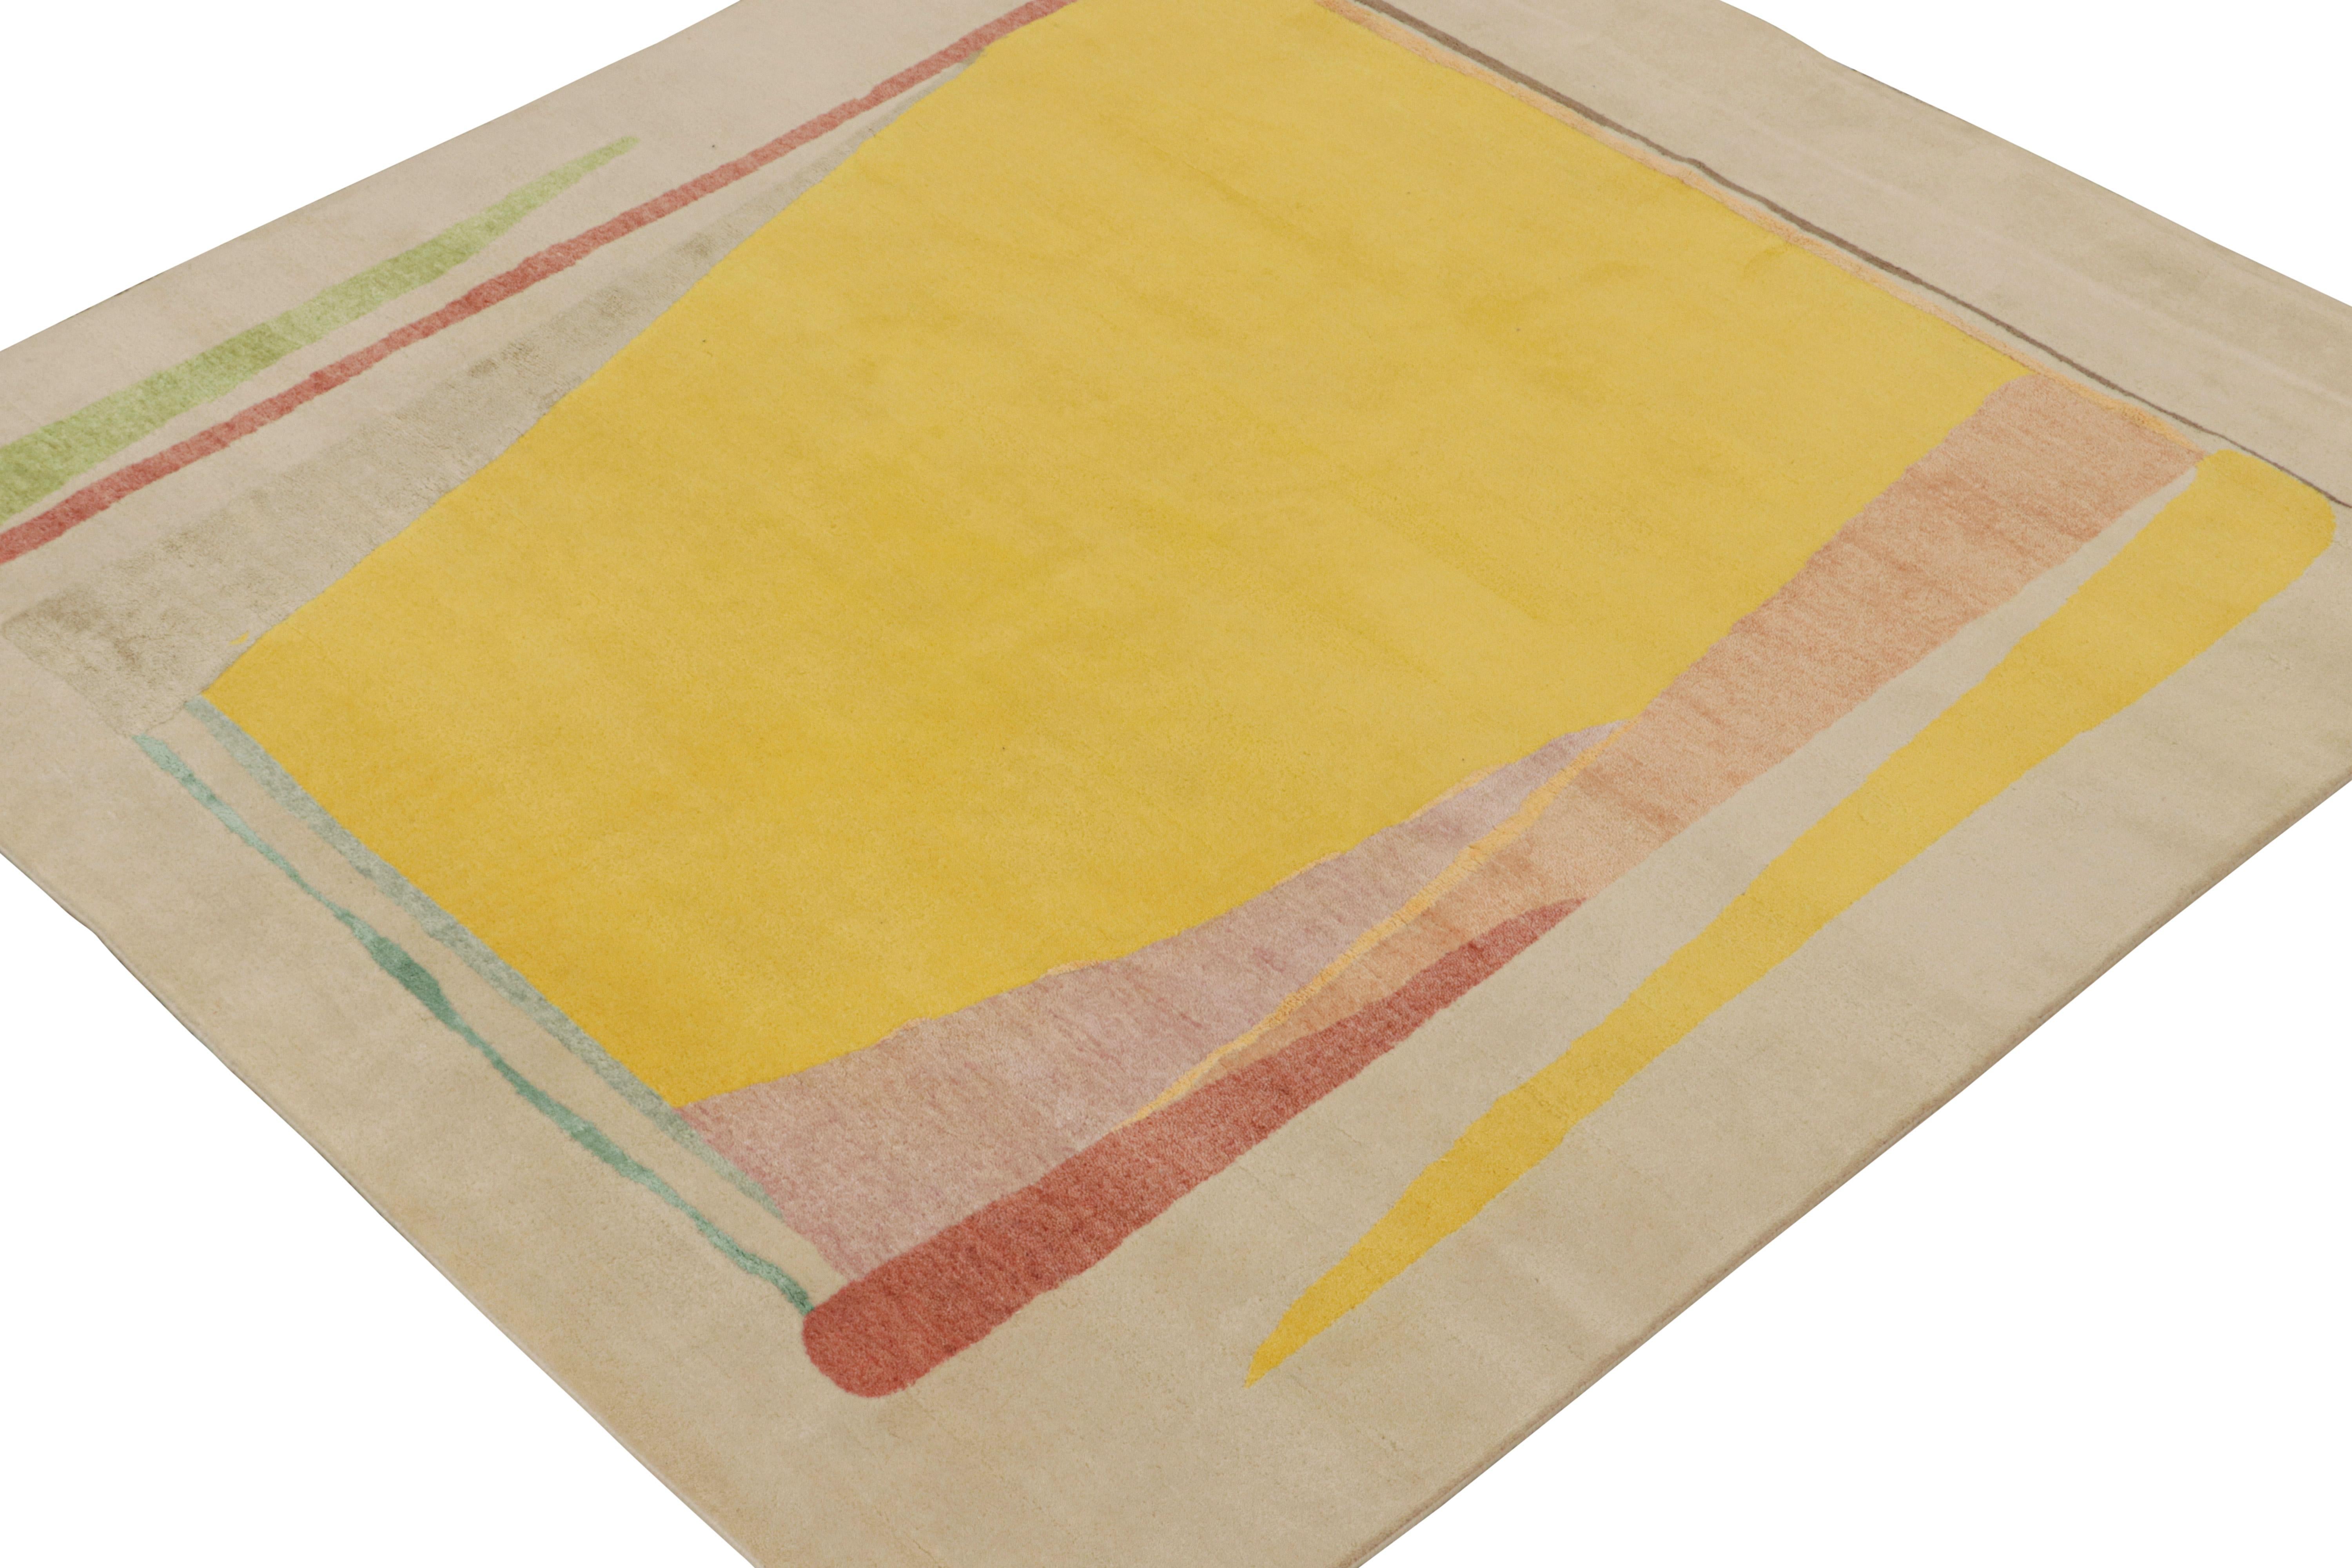 A 6×6 Mid-Century Modern rug from the titular collection by Rug & Kilim—a reimagining of bold 1950s postmodern art styles. 

Hand-knotted in wool, cotton and silk, this design evokes a painterly style in vibrant yellow, red and green on a beige